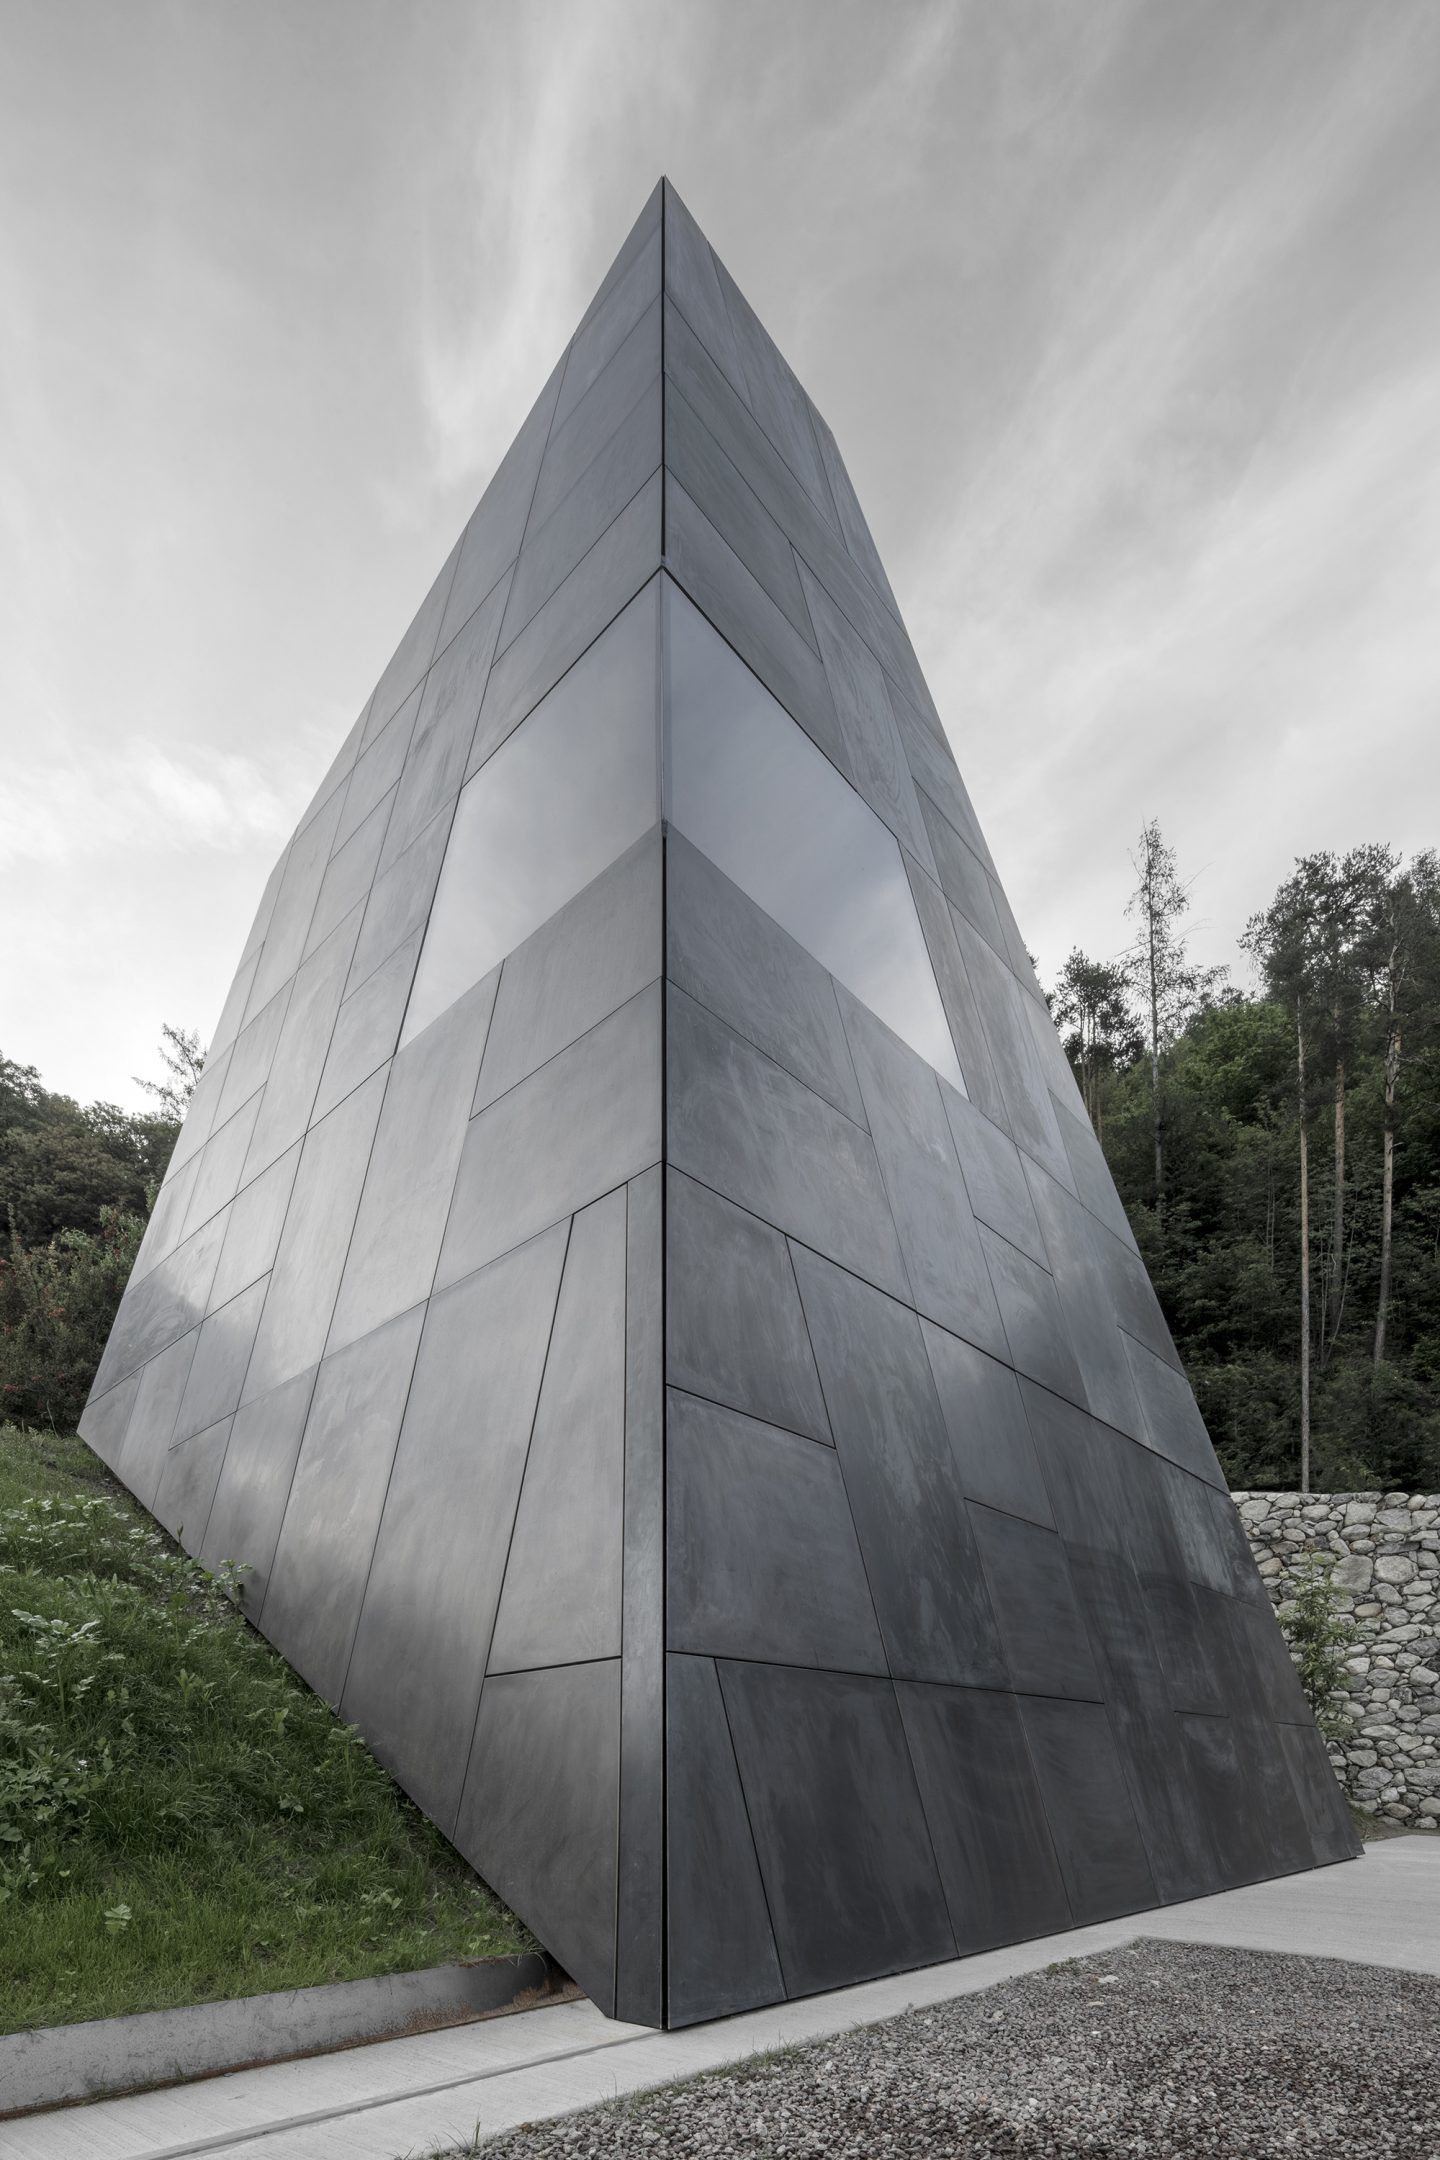 Beneath The Mountains Of Tyrol, This Wine Cellar\'s Geometric Form Bursts  Free From The Landscape - IGNANT